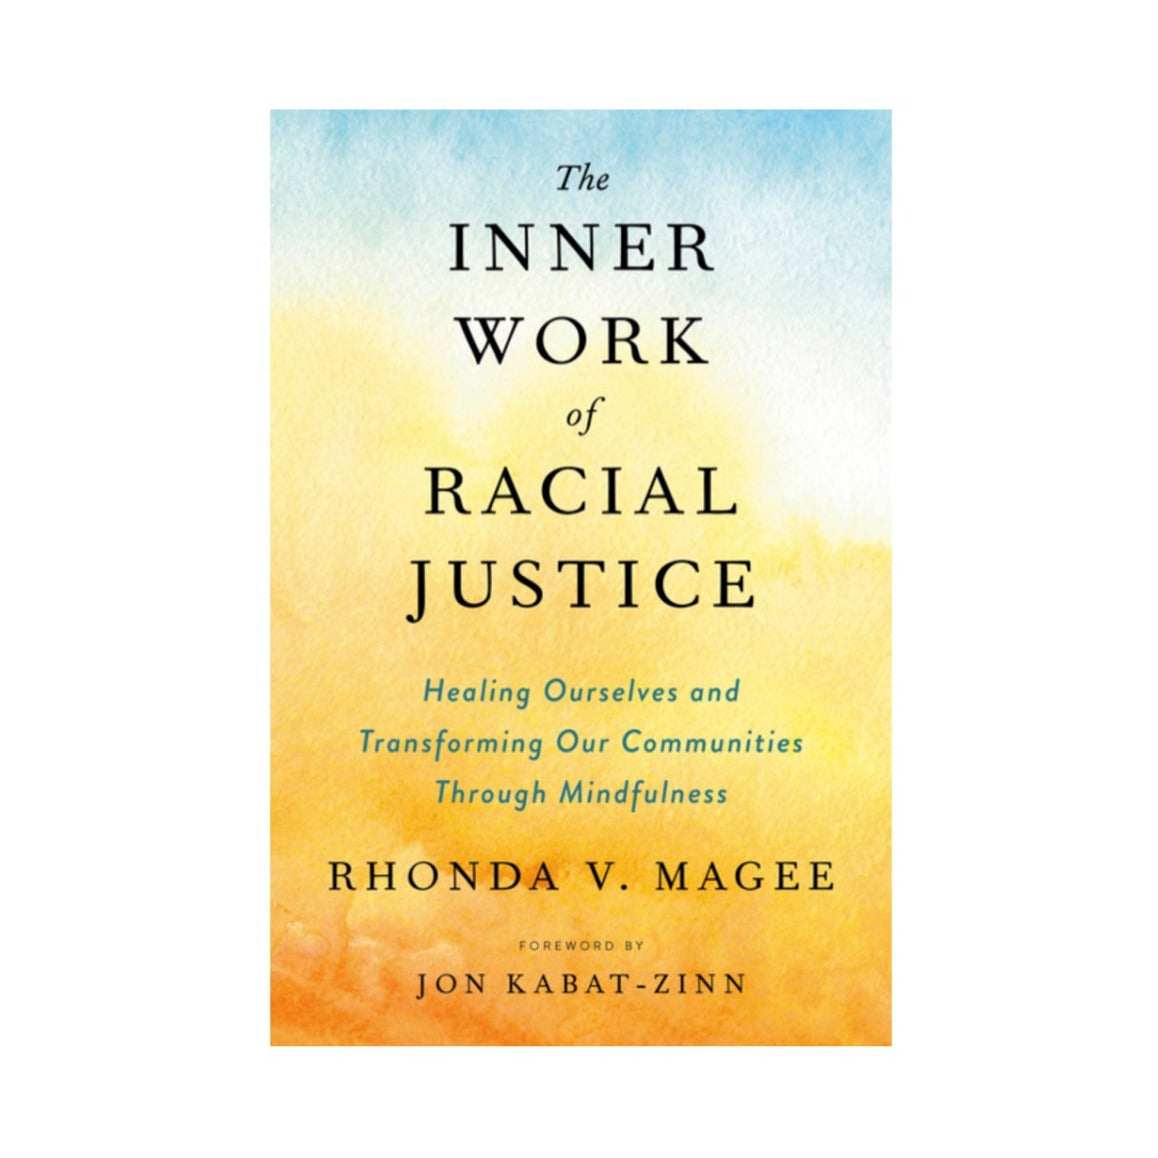 The Inner Work of Racial Justice by Rhonda V. Magee